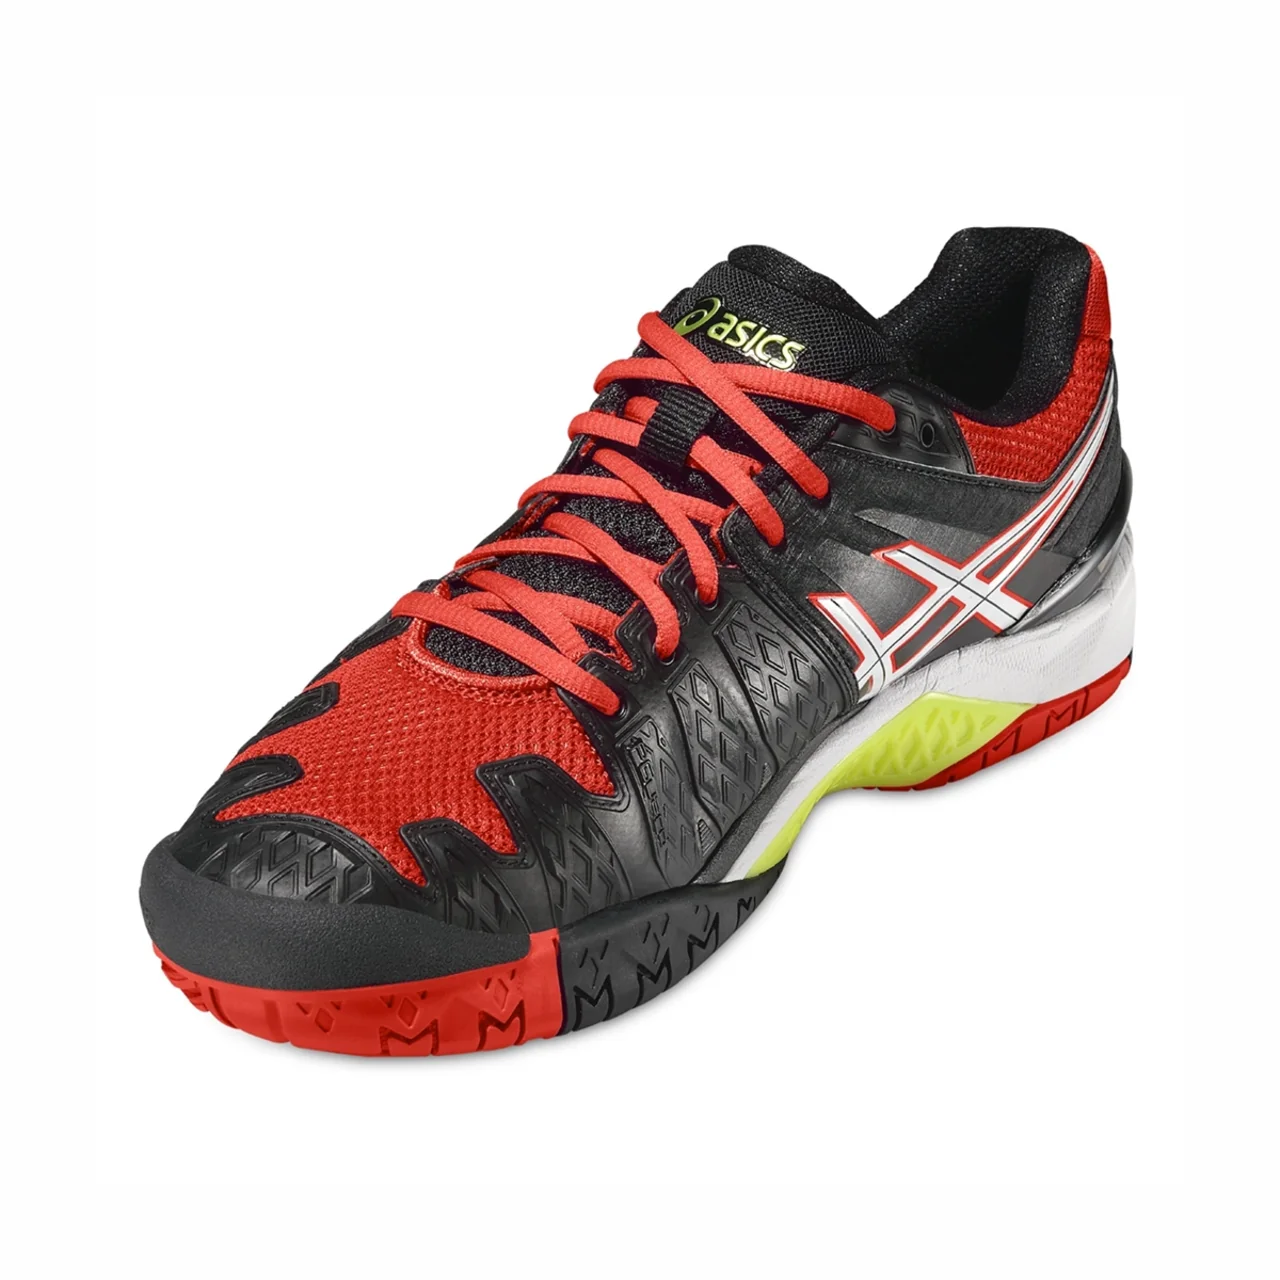 Asics Gel-Resolution 6 Clay Black/Red. Size 43.5